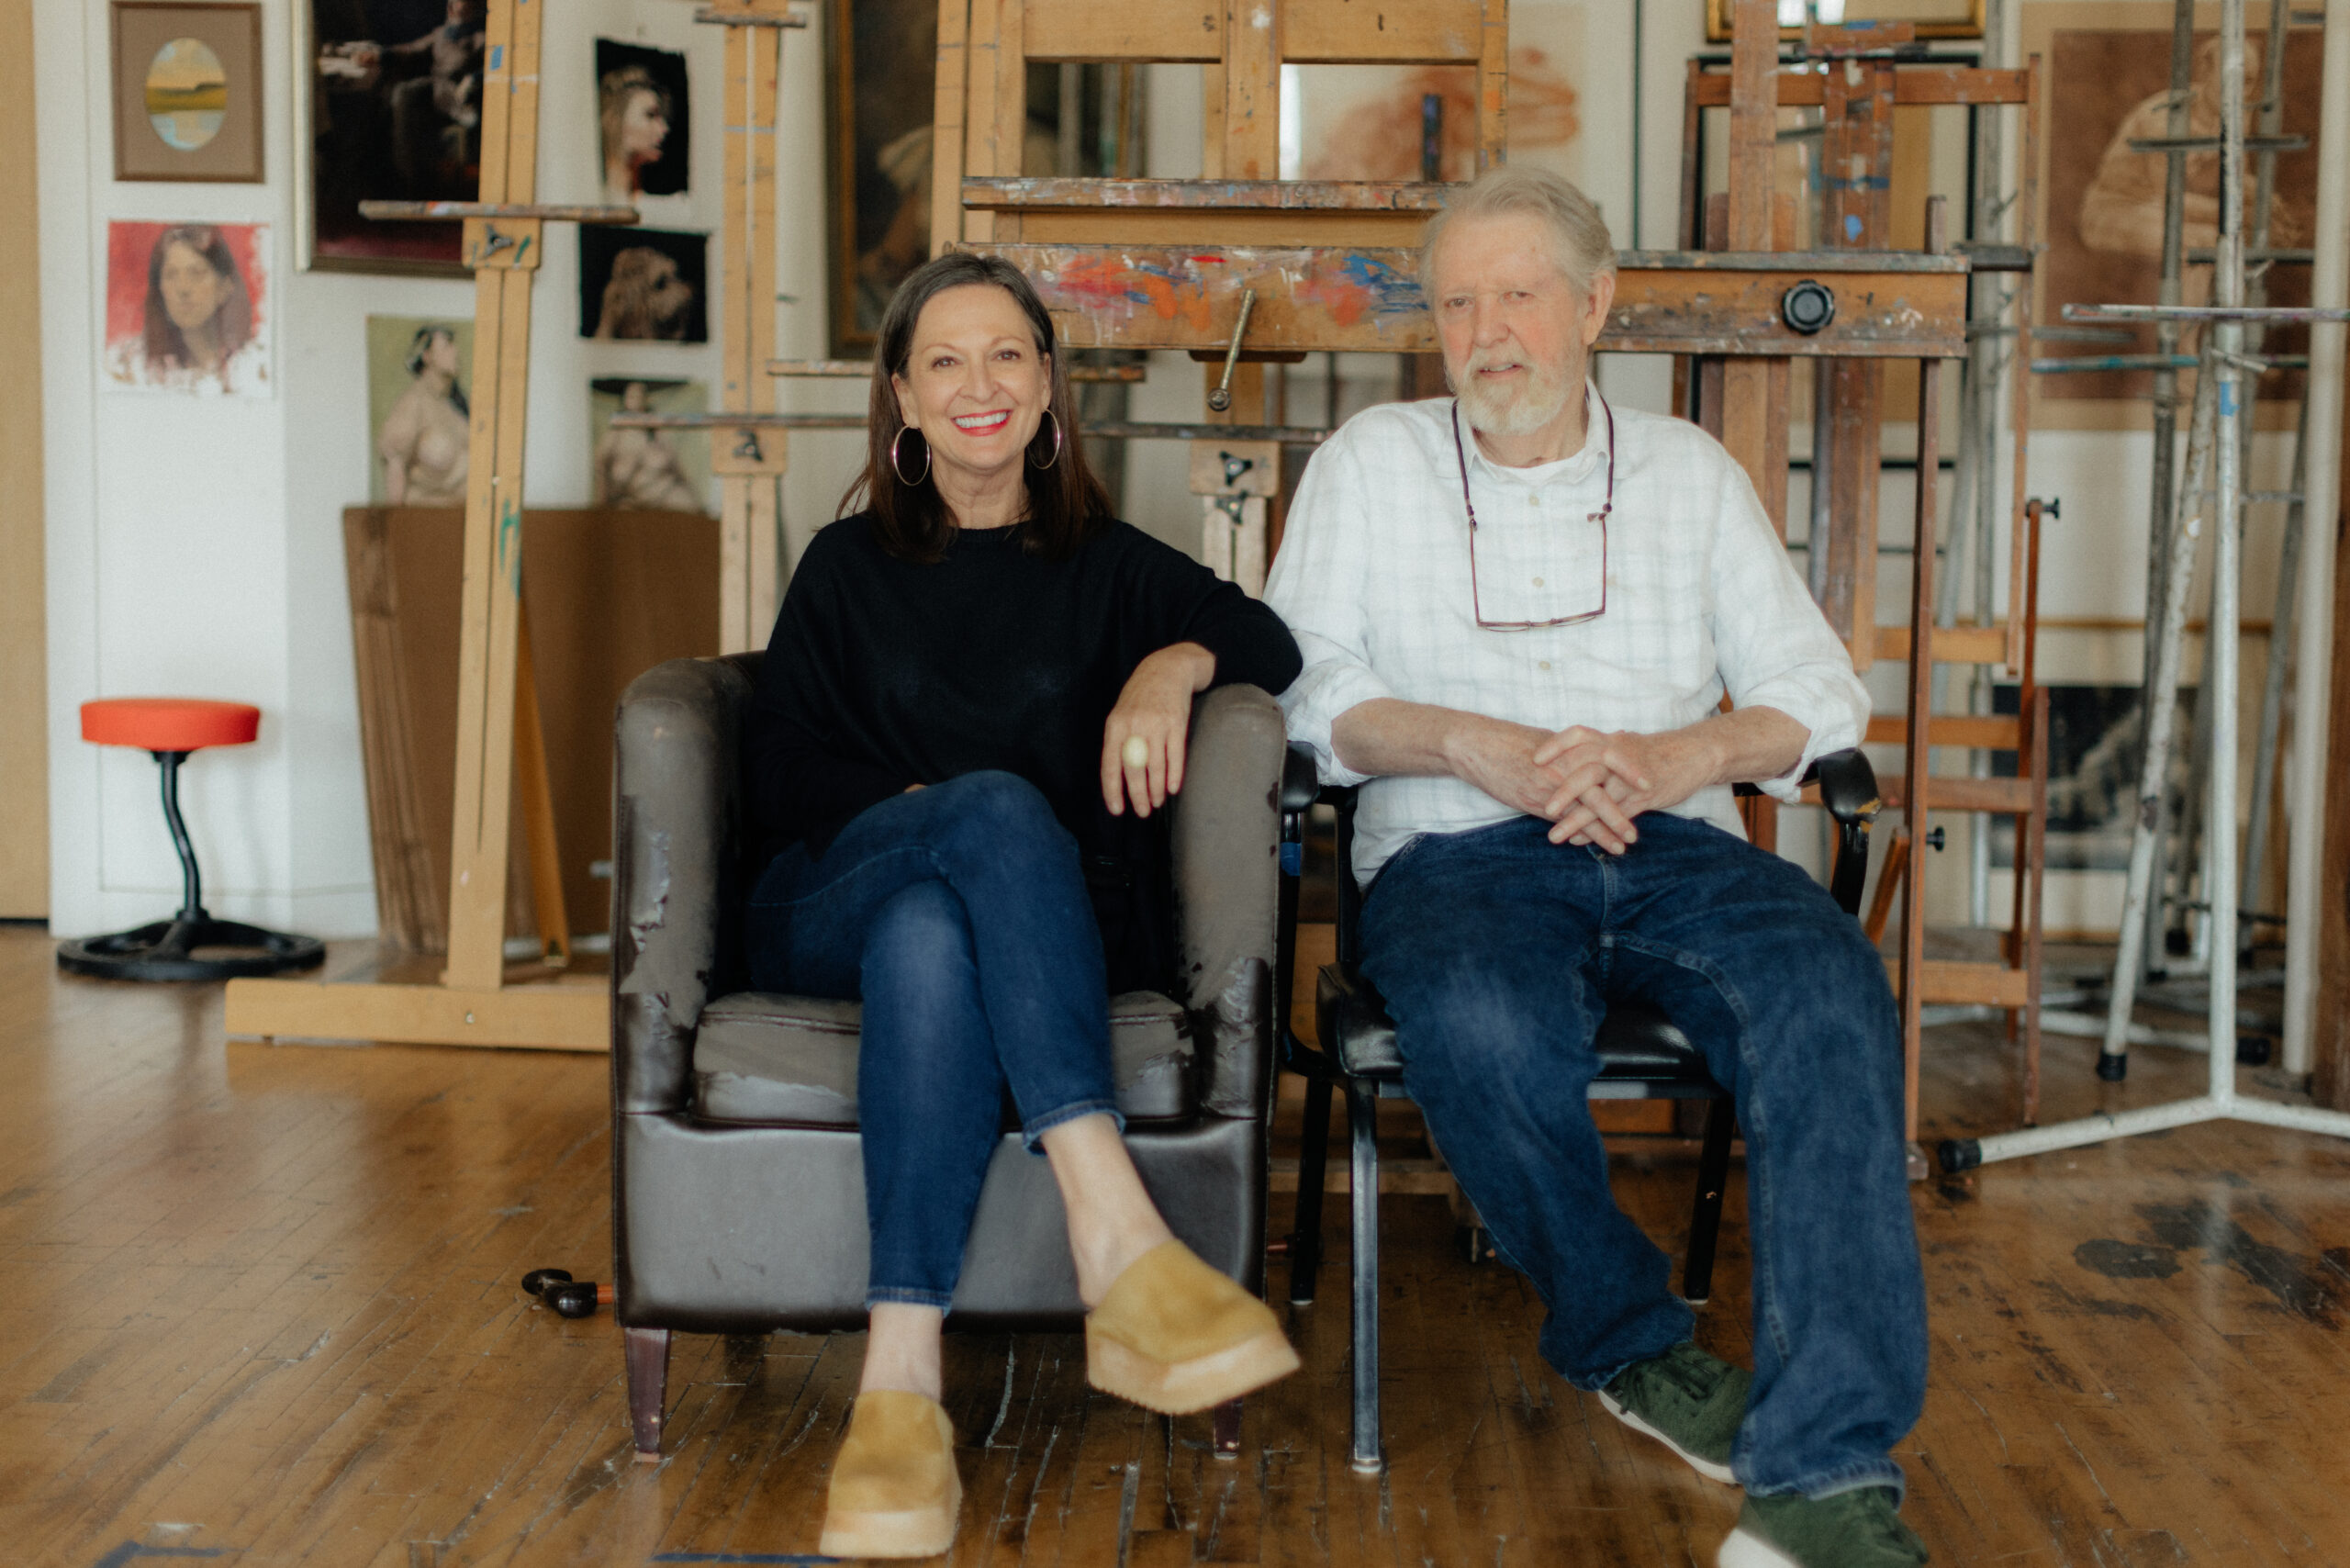 Portrait of Peggy and Stan Townsend in Townsend Atelier. The couple are seated with their artwork surrounding them.